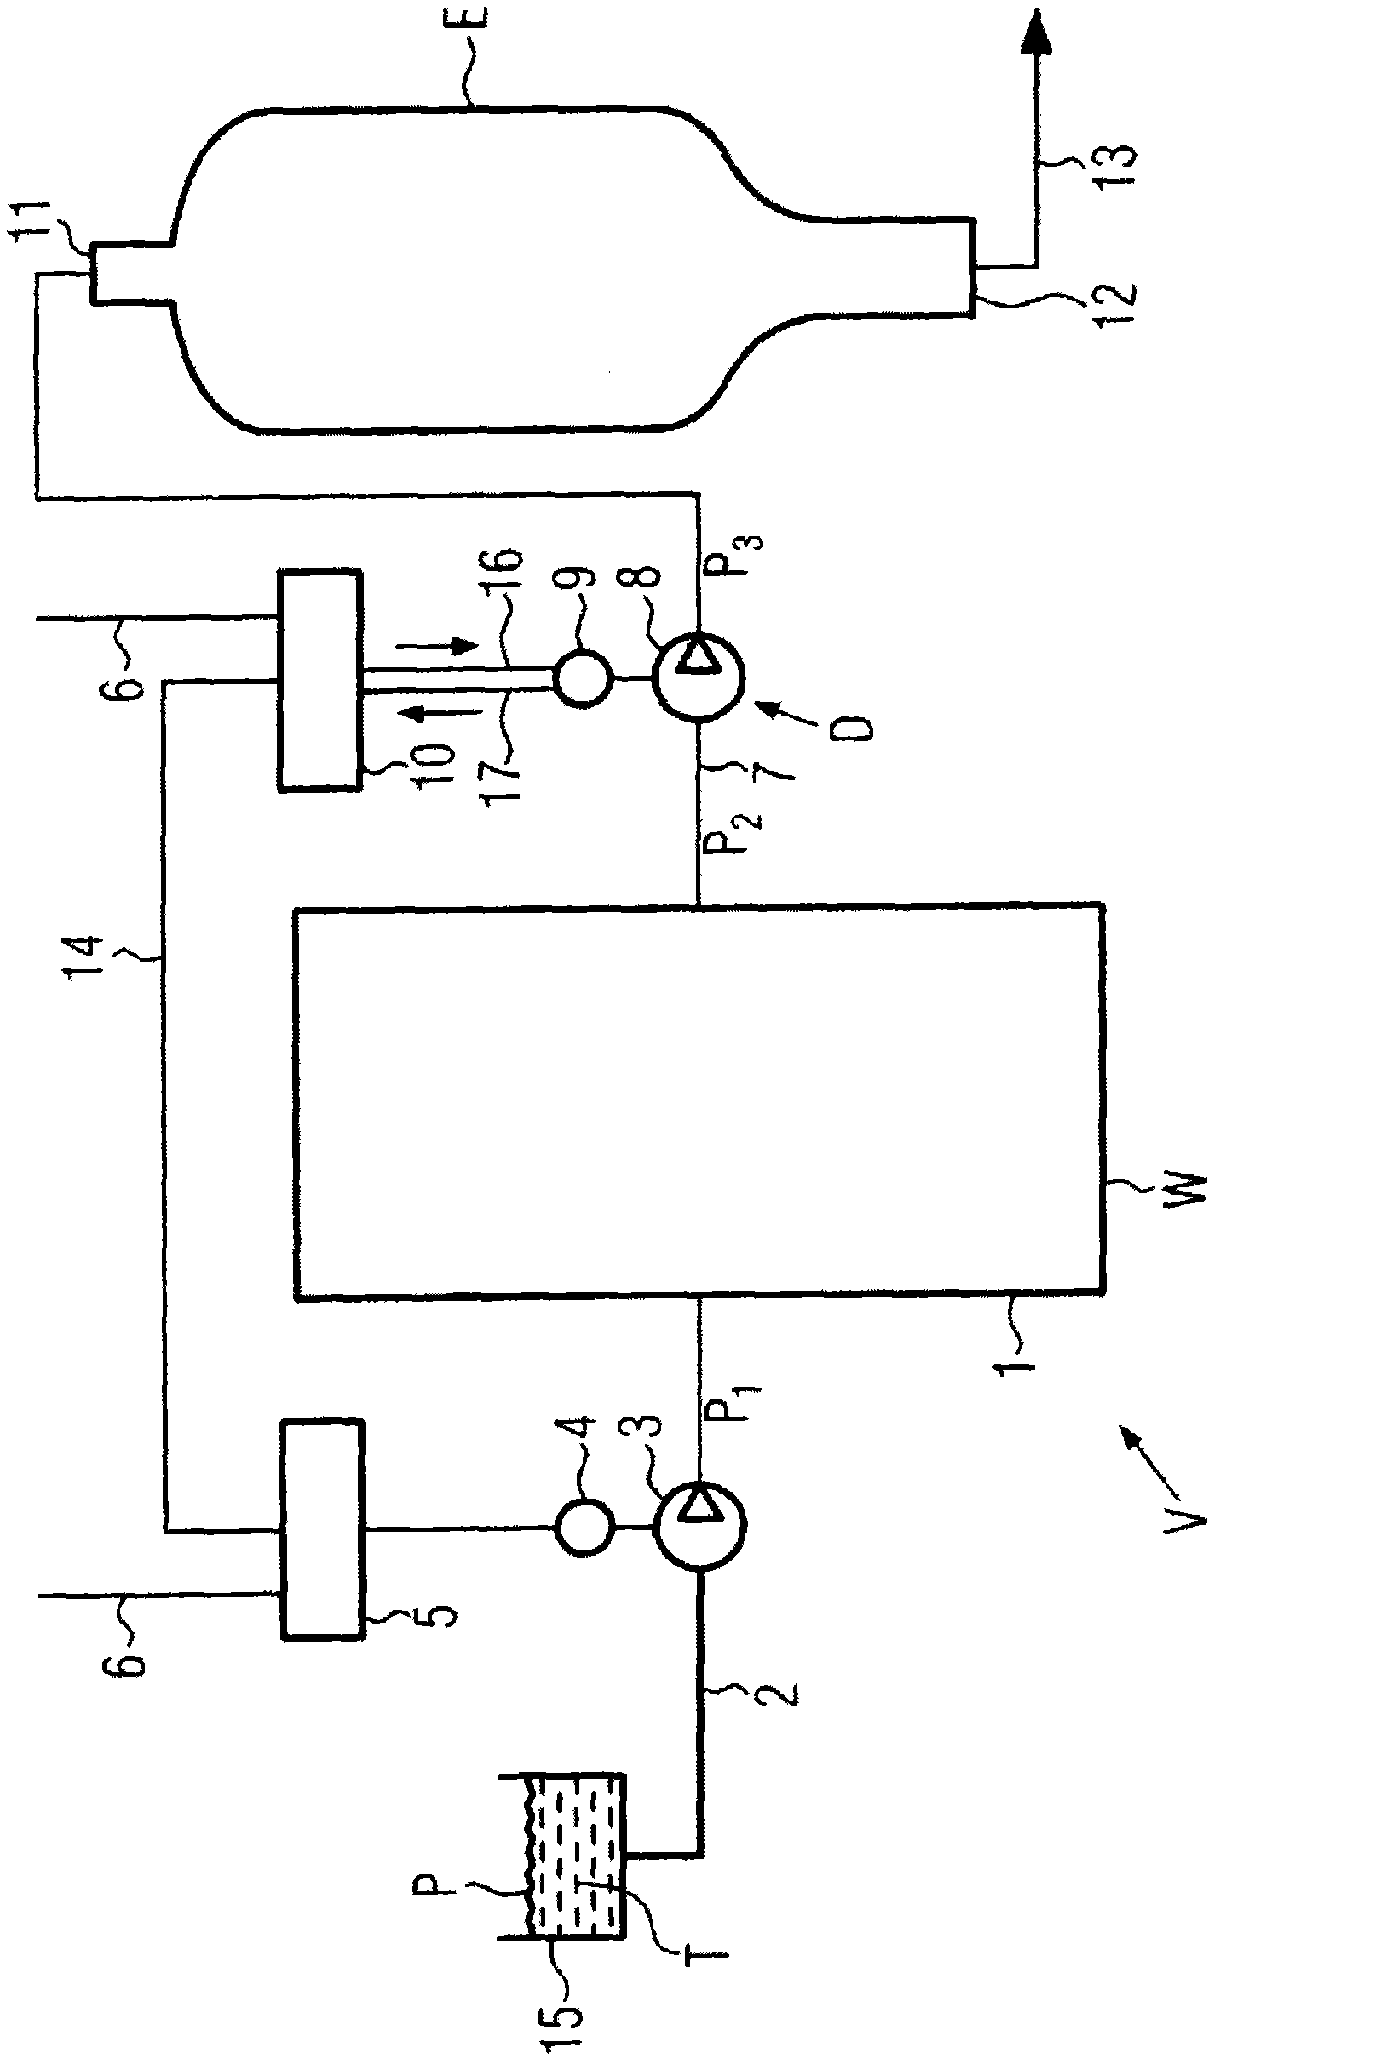 Method and device for treating a liquid food product